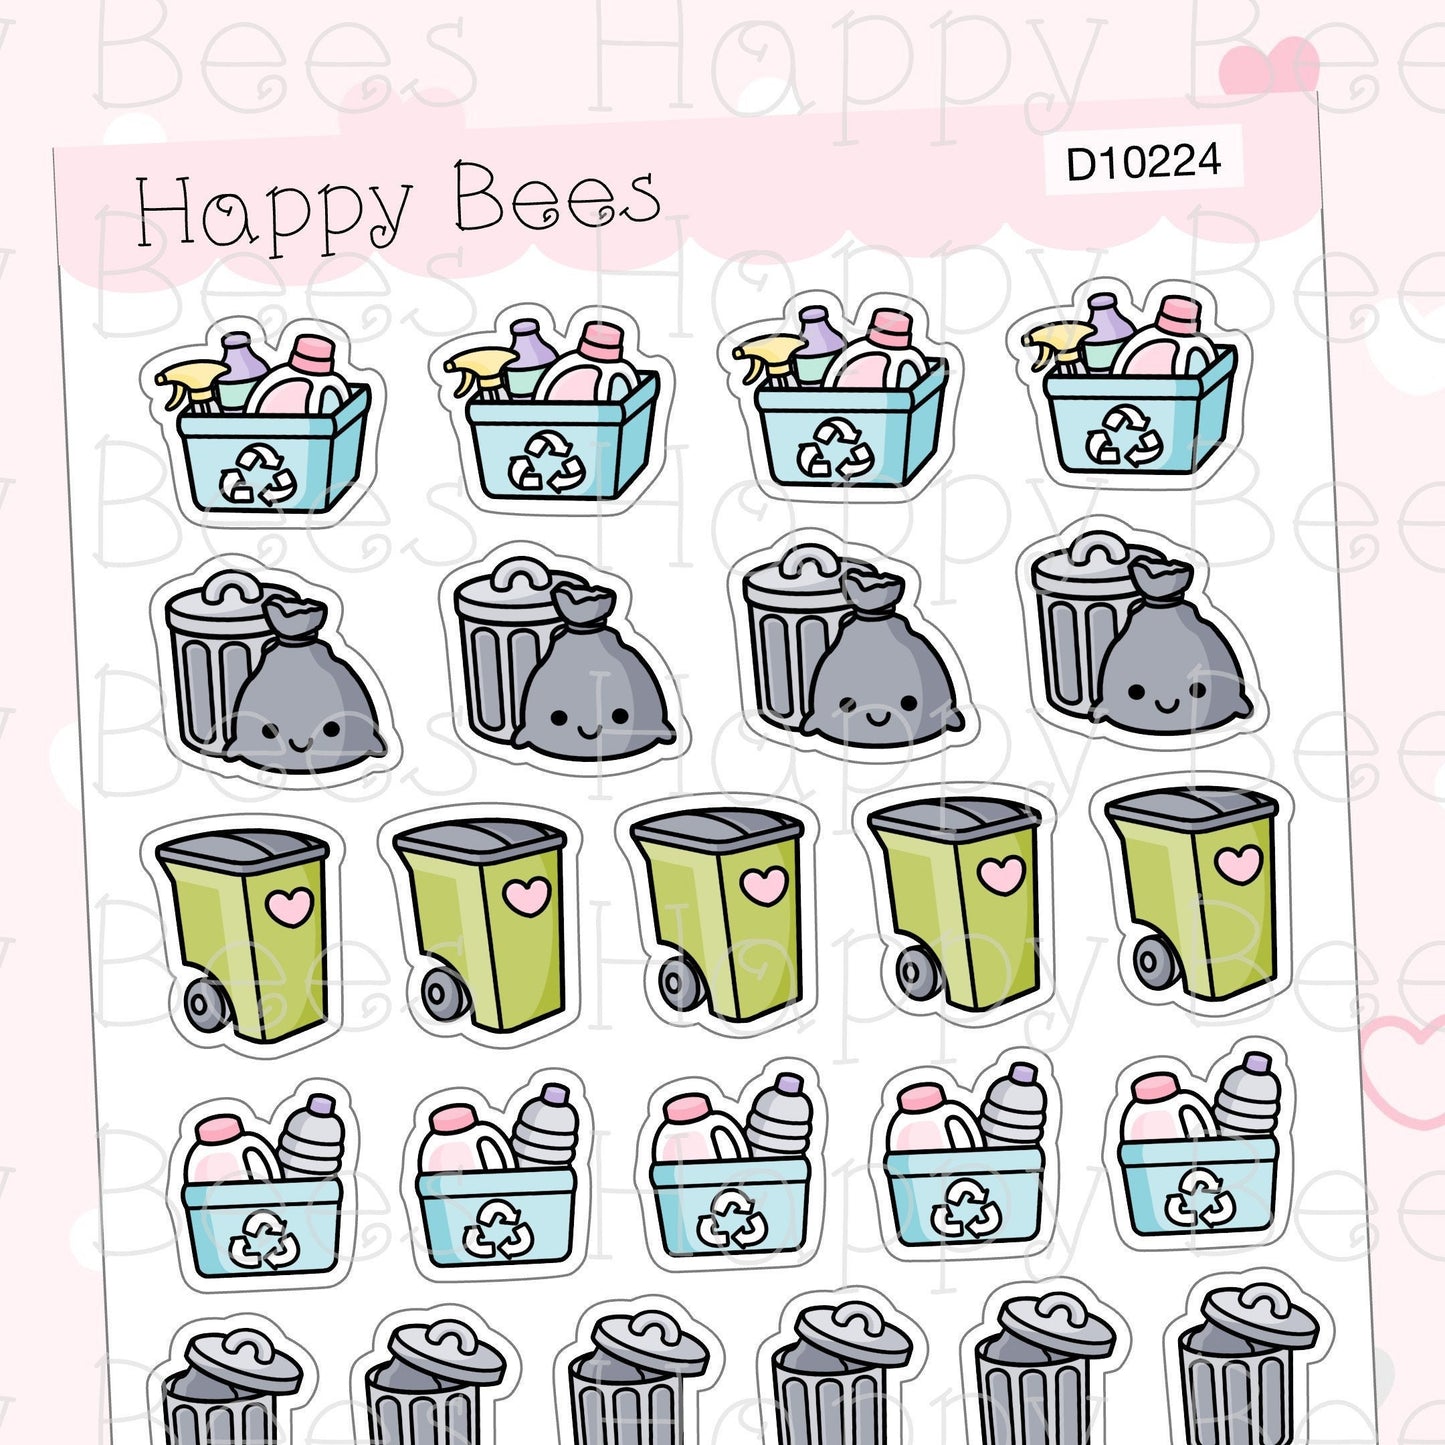 Trash & Recycle Day Doodles Vol. 2 - Cute Chores Housework Planner Stickers D10224